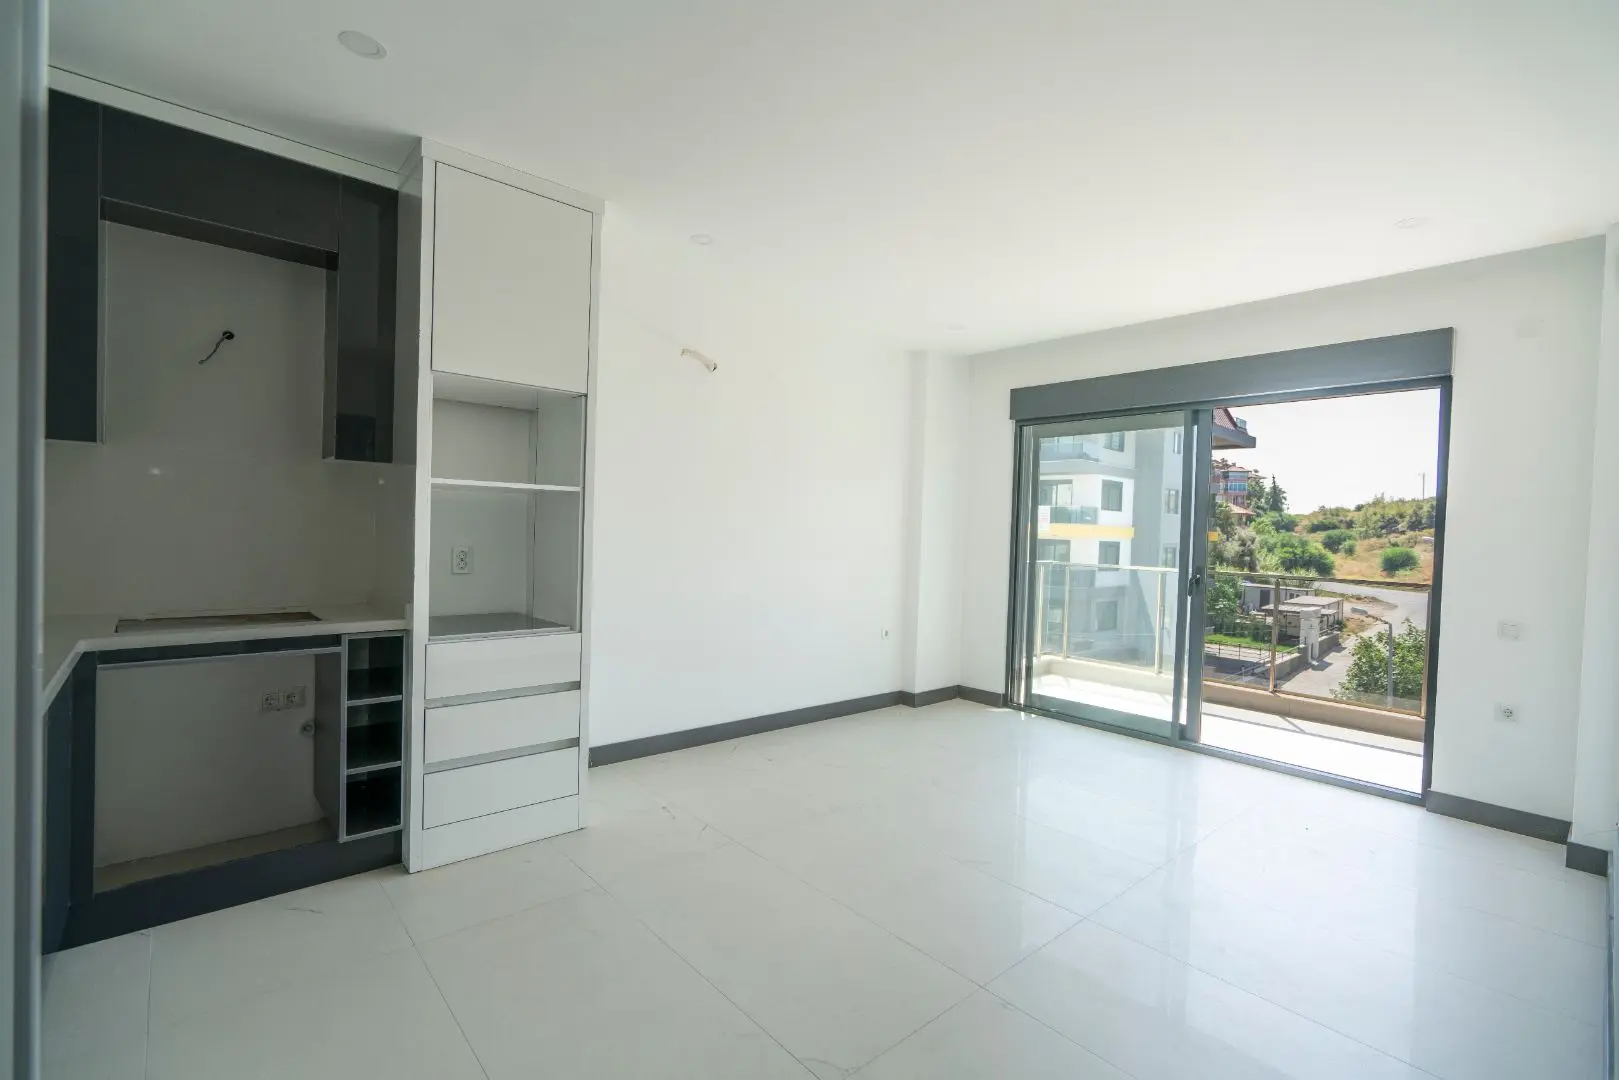 EMPTY 1+1 APARTMENT IN A NEWLY BUILT BUILDING IN KESTEL-ALANYA